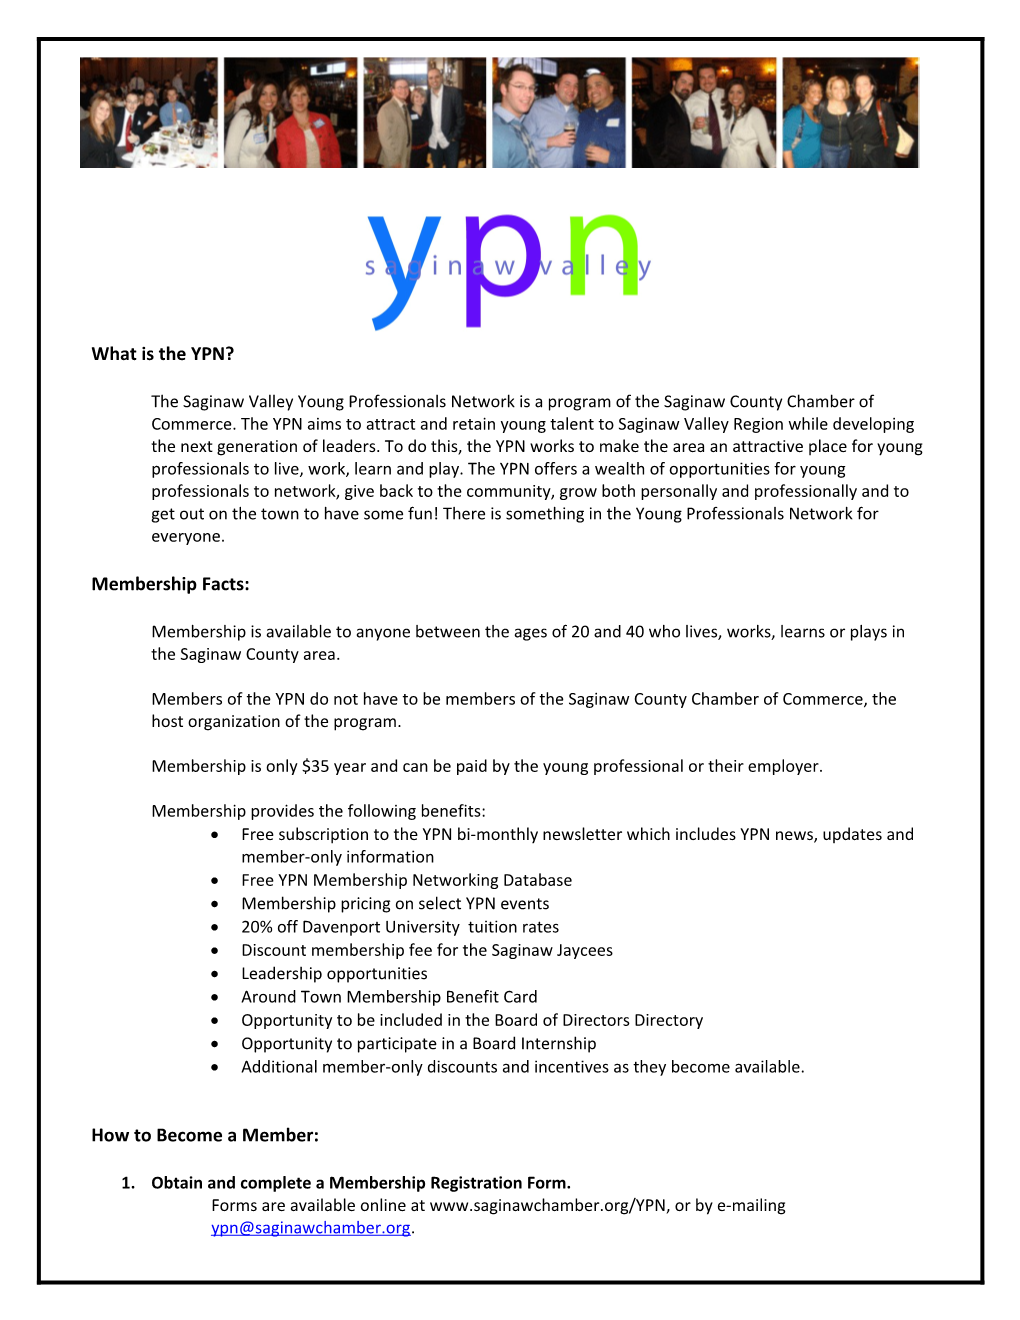 What Is the YPN?